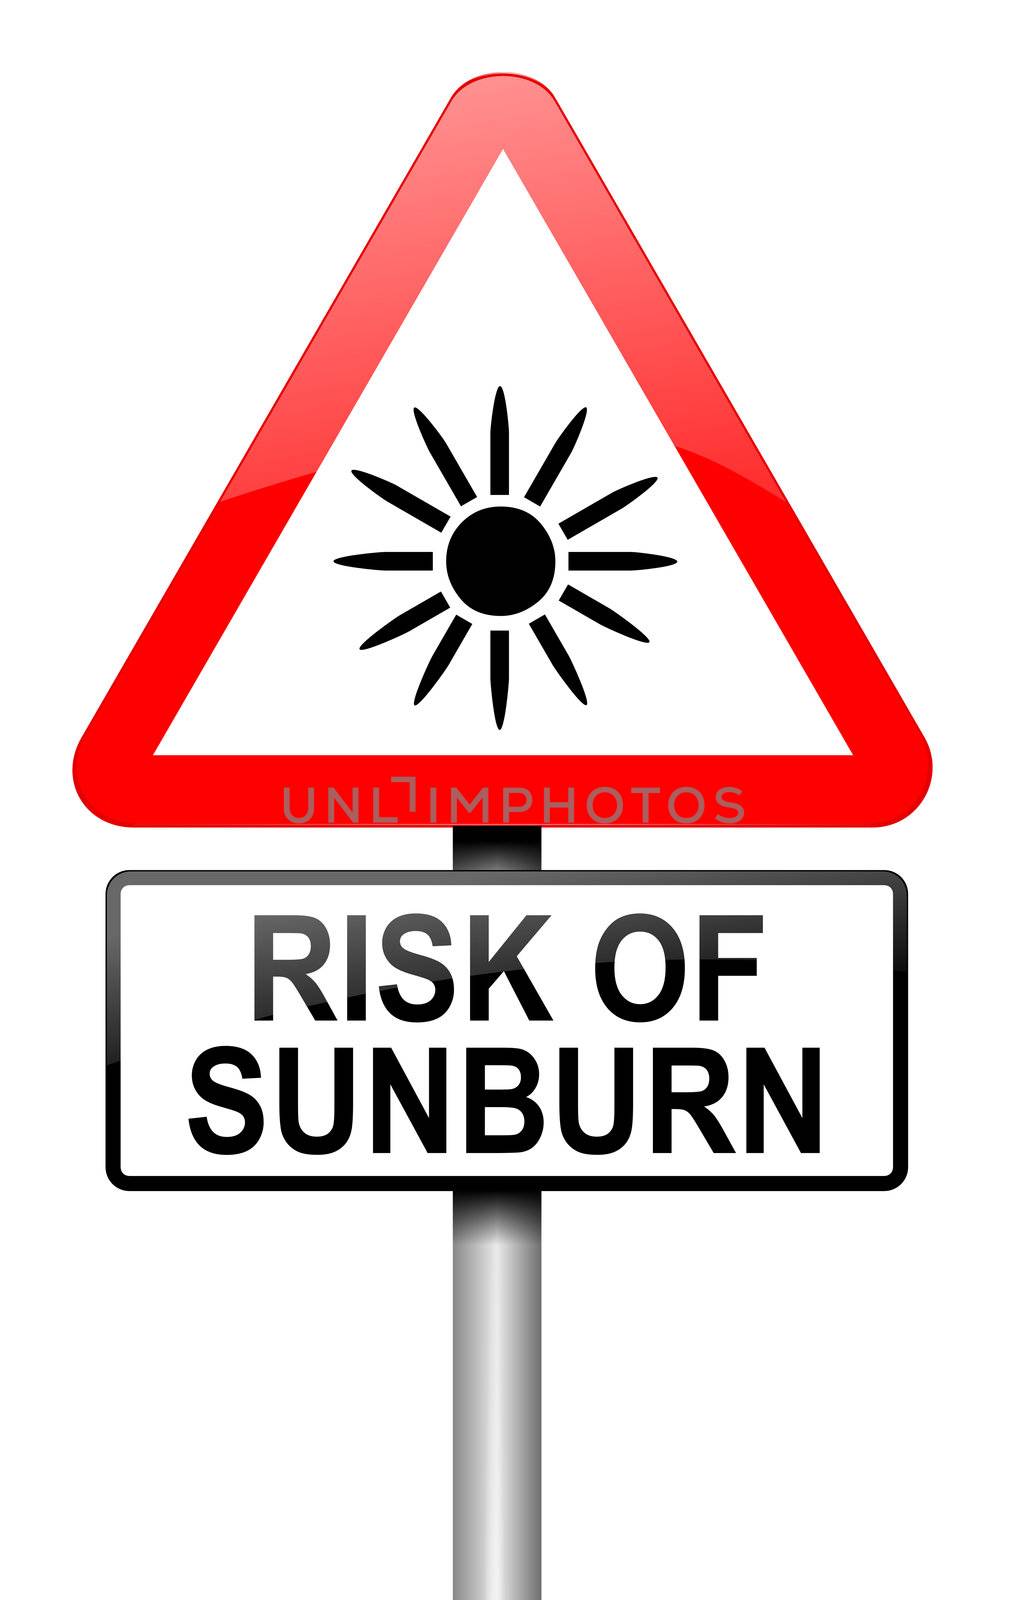 Illustration depicting a road traffic sign with asunburn risk concept. White background.